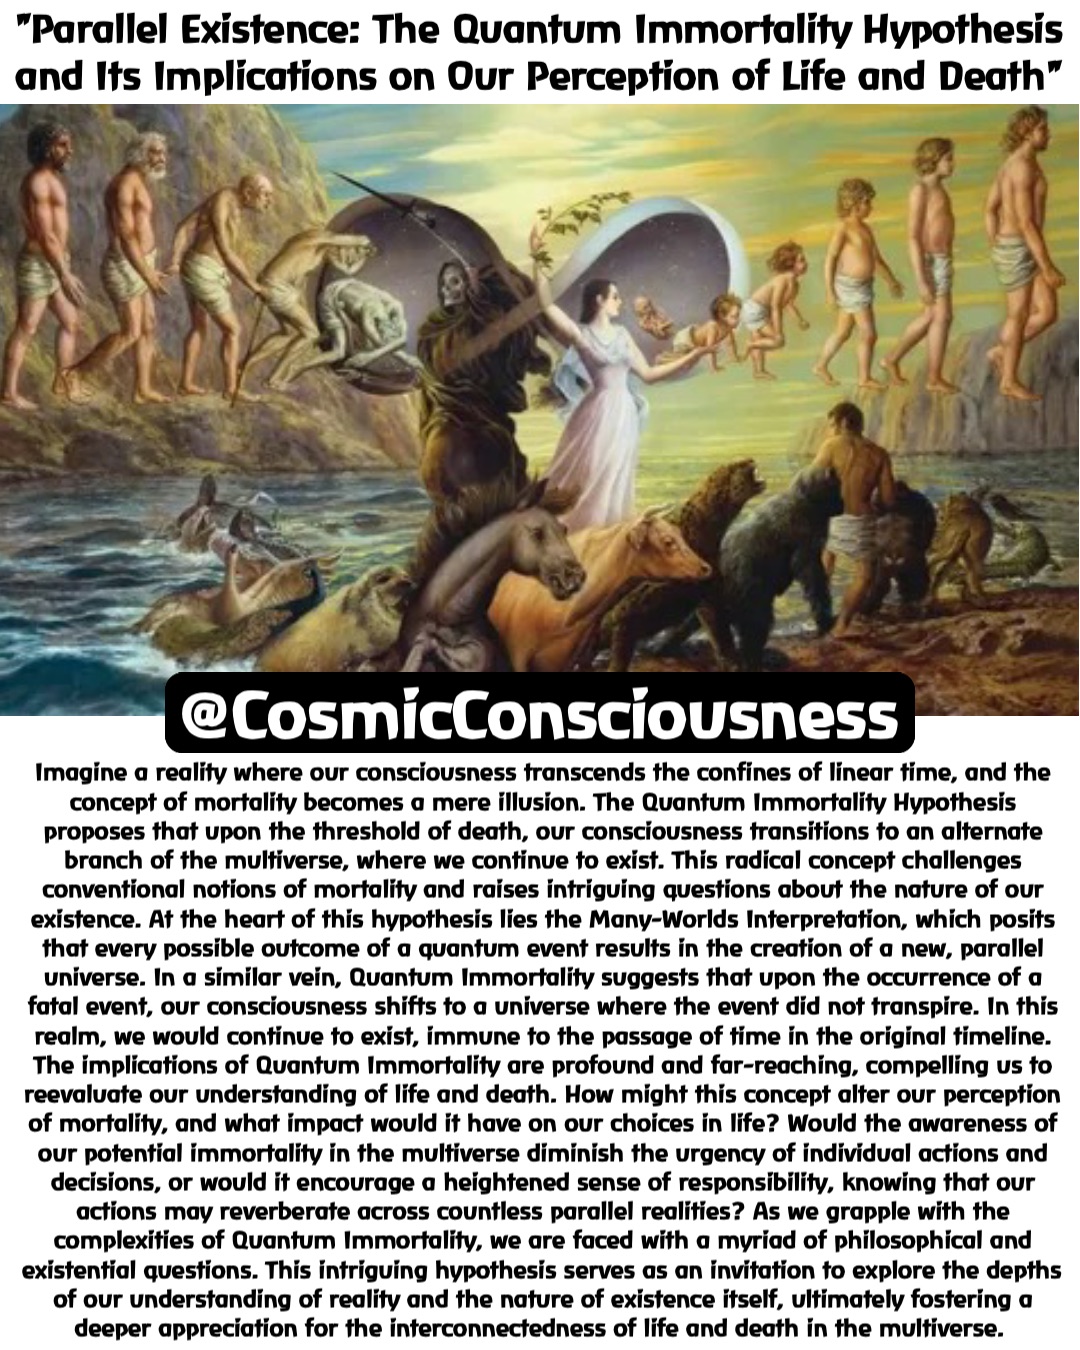 "Parallel Existence: The Quantum Immortality Hypothesis and Its Implications on Our Perception of Life and Death" Imagine a reality where our consciousness transcends the confines of linear time, and the concept of mortality becomes a mere illusion. The Quantum Immortality Hypothesis proposes that upon the threshold of death, our consciousness transitions to an alternate branch of the multiverse, where we continue to exist. This radical concept challenges conventional notions of mortality and raises intriguing questions about the nature of our existence. At the heart of this hypothesis lies the Many-Worlds Interpretation, which posits that every possible outcome of a quantum event results in the creation of a new, parallel universe. In a similar vein, Quantum Immortality suggests that upon the occurrence of a fatal event, our consciousness shifts to a universe where the event did not transpire. In this realm, we would continue to exist, immune to the passage of time in the original timeline. The implications of Quantum Immortality are profound and far-reaching, compelling us to reevaluate our understanding of life and death. How might this concept alter our perception of mortality, and what impact would it have on our choices in life? Would the awareness of our potential immortality in the multiverse diminish the urgency of individual actions and decisions, or would it encourage a heightened sense of responsibility, knowing that our actions may reverberate across countless parallel realities? As we grapple with the complexities of Quantum Immortality, we are faced with a myriad of philosophical and existential questions. This intriguing hypothesis serves as an invitation to explore the depths of our understanding of reality and the nature of existence itself, ultimately fostering a deeper appreciation for the interconnectedness of life and death in the multiverse. @CosmicConsciousness